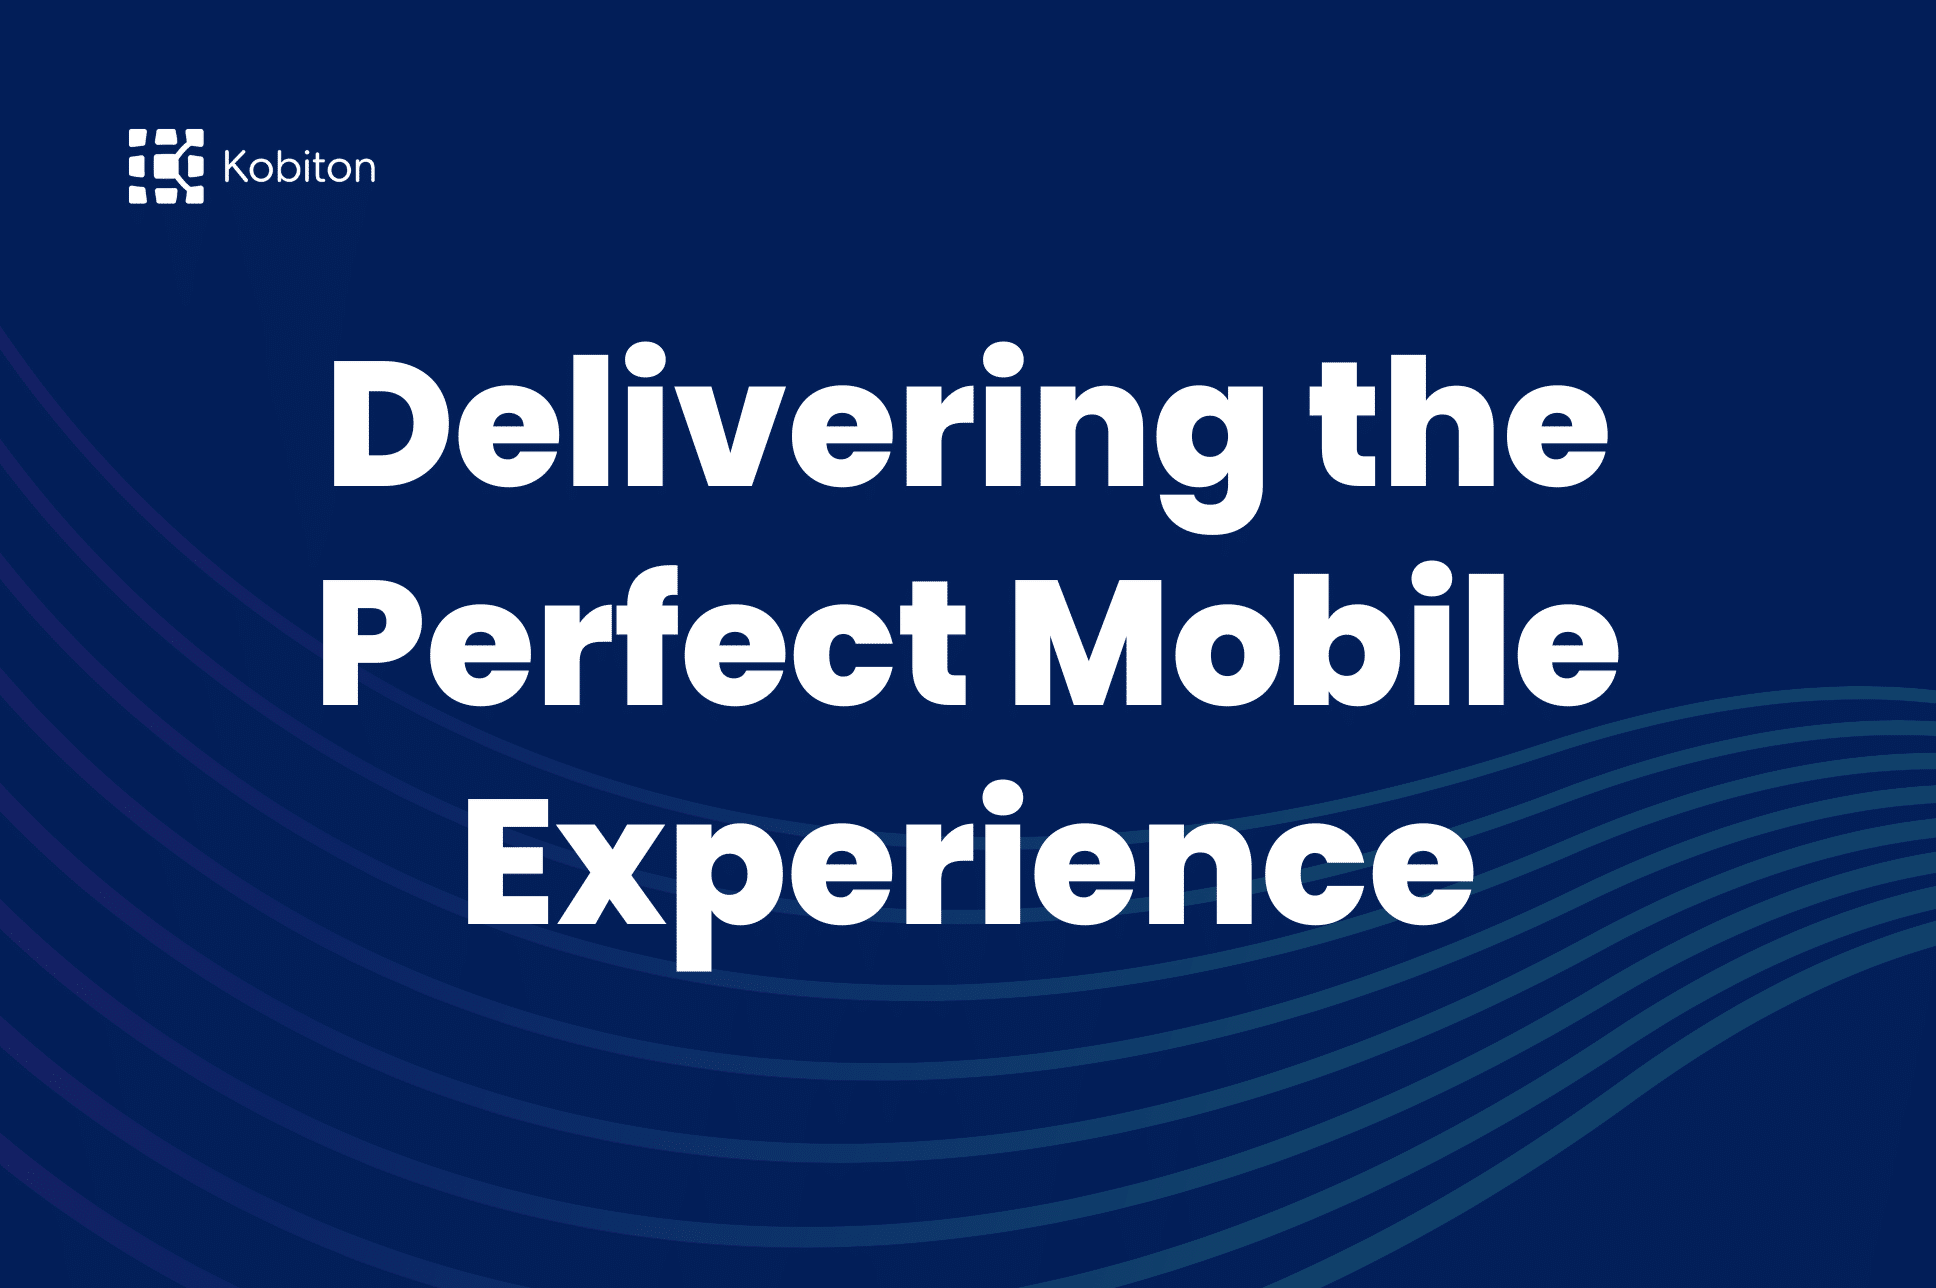 Delivering the Perfect Mobile Experience